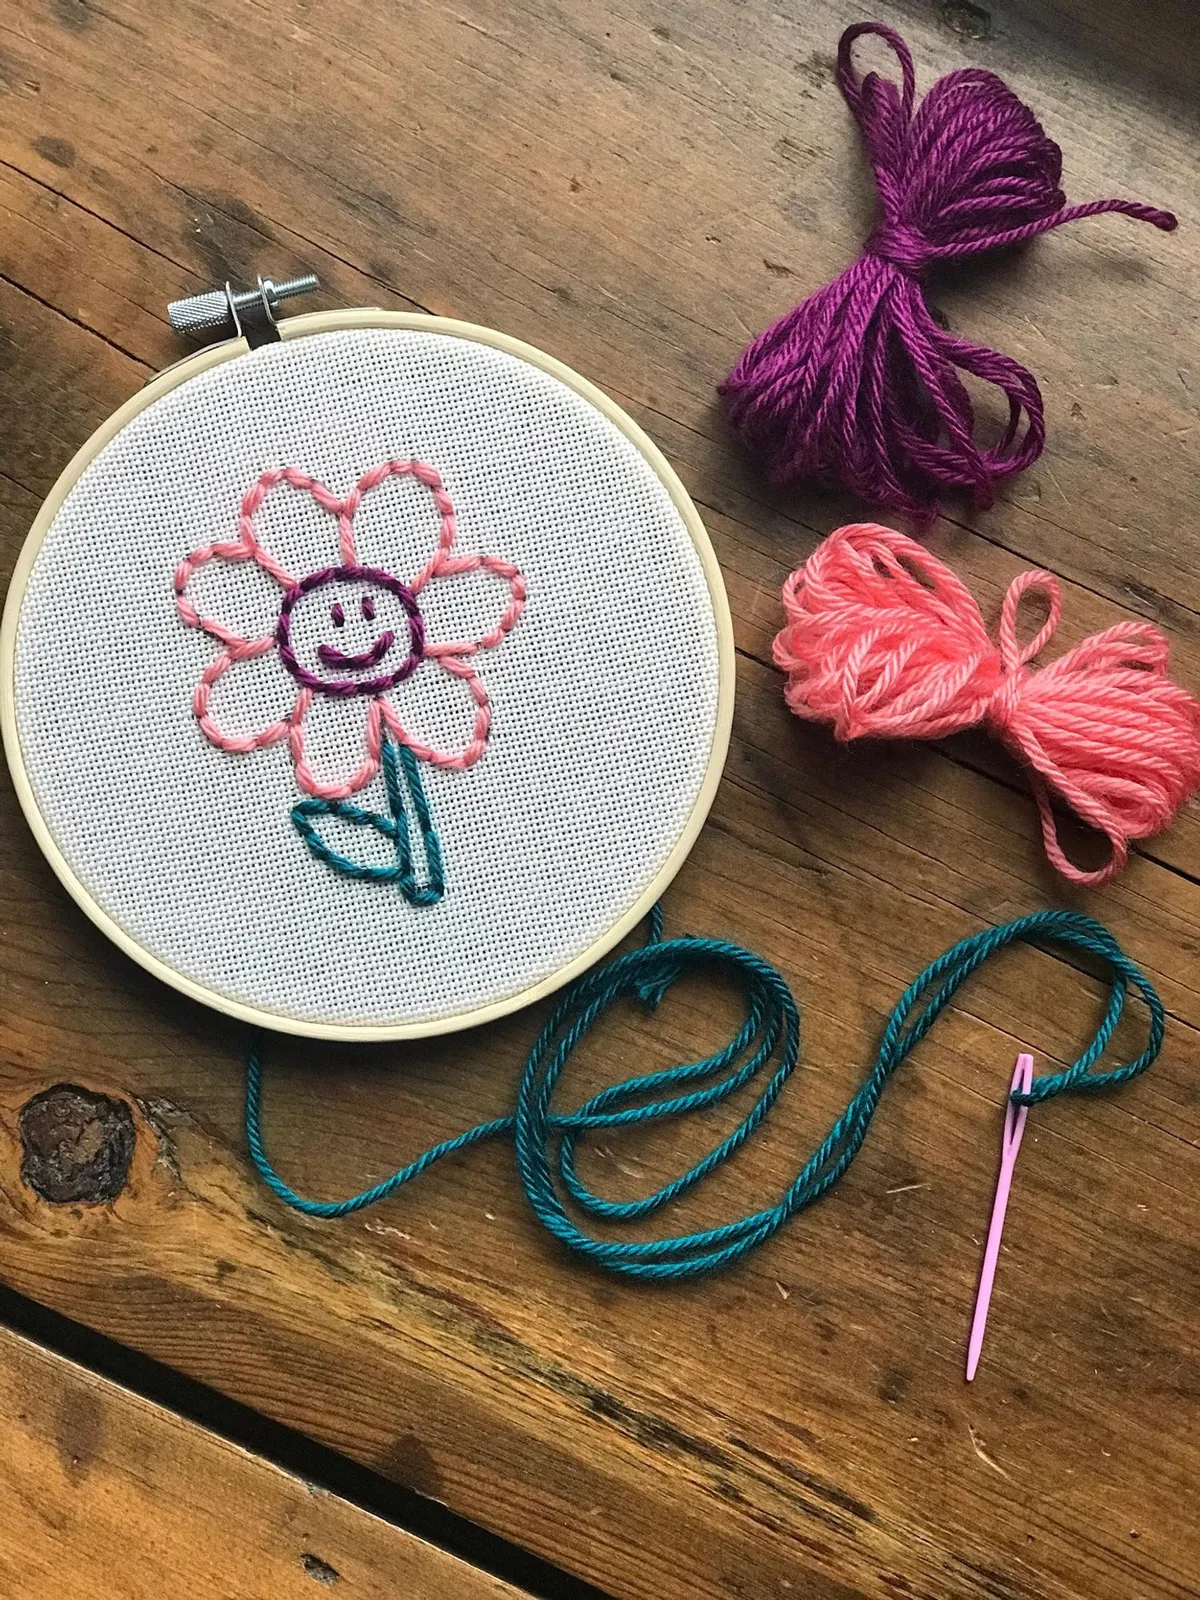 10+ Exhilarating Designing Your Own Cross Stitch Embroidery Patterns Ideas